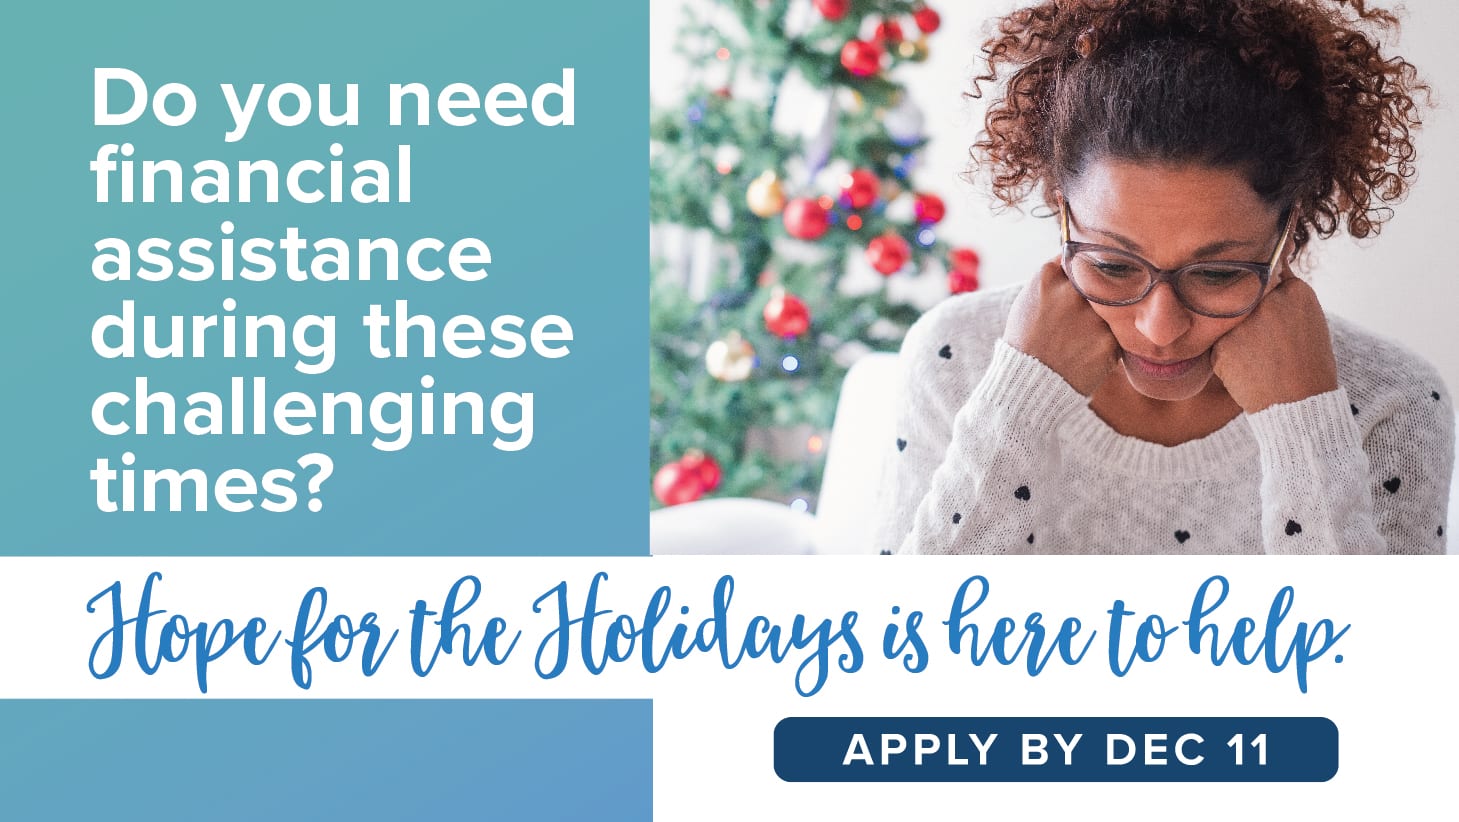 If you need financial assistance this holiday season, click here to learn more about our Hope for the Holidays program and apply by December 11.